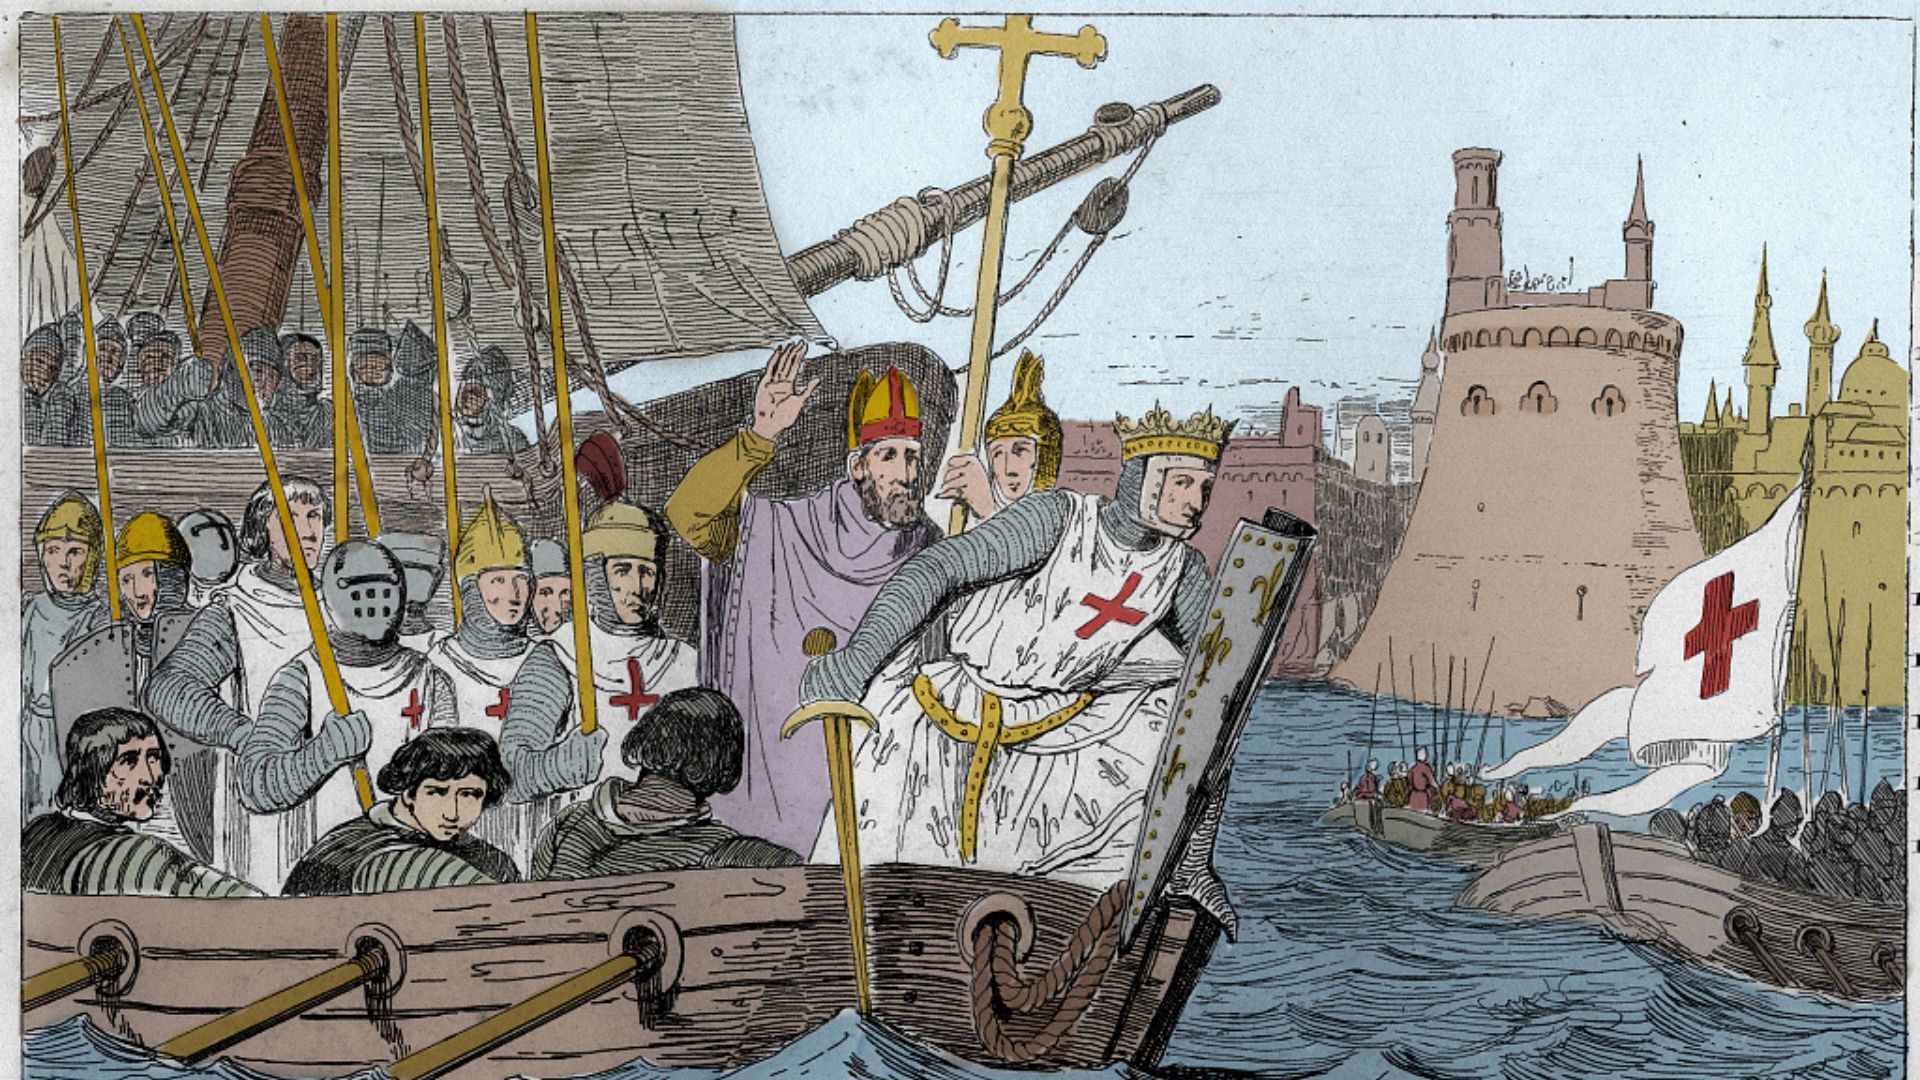 An engraving in an 1825 French children's history book shows Louis IX leading crusaders to the Holy Land in 1248-50 - under a familiar cross. /Stefano Bianchetti/Corbis/Getty Images